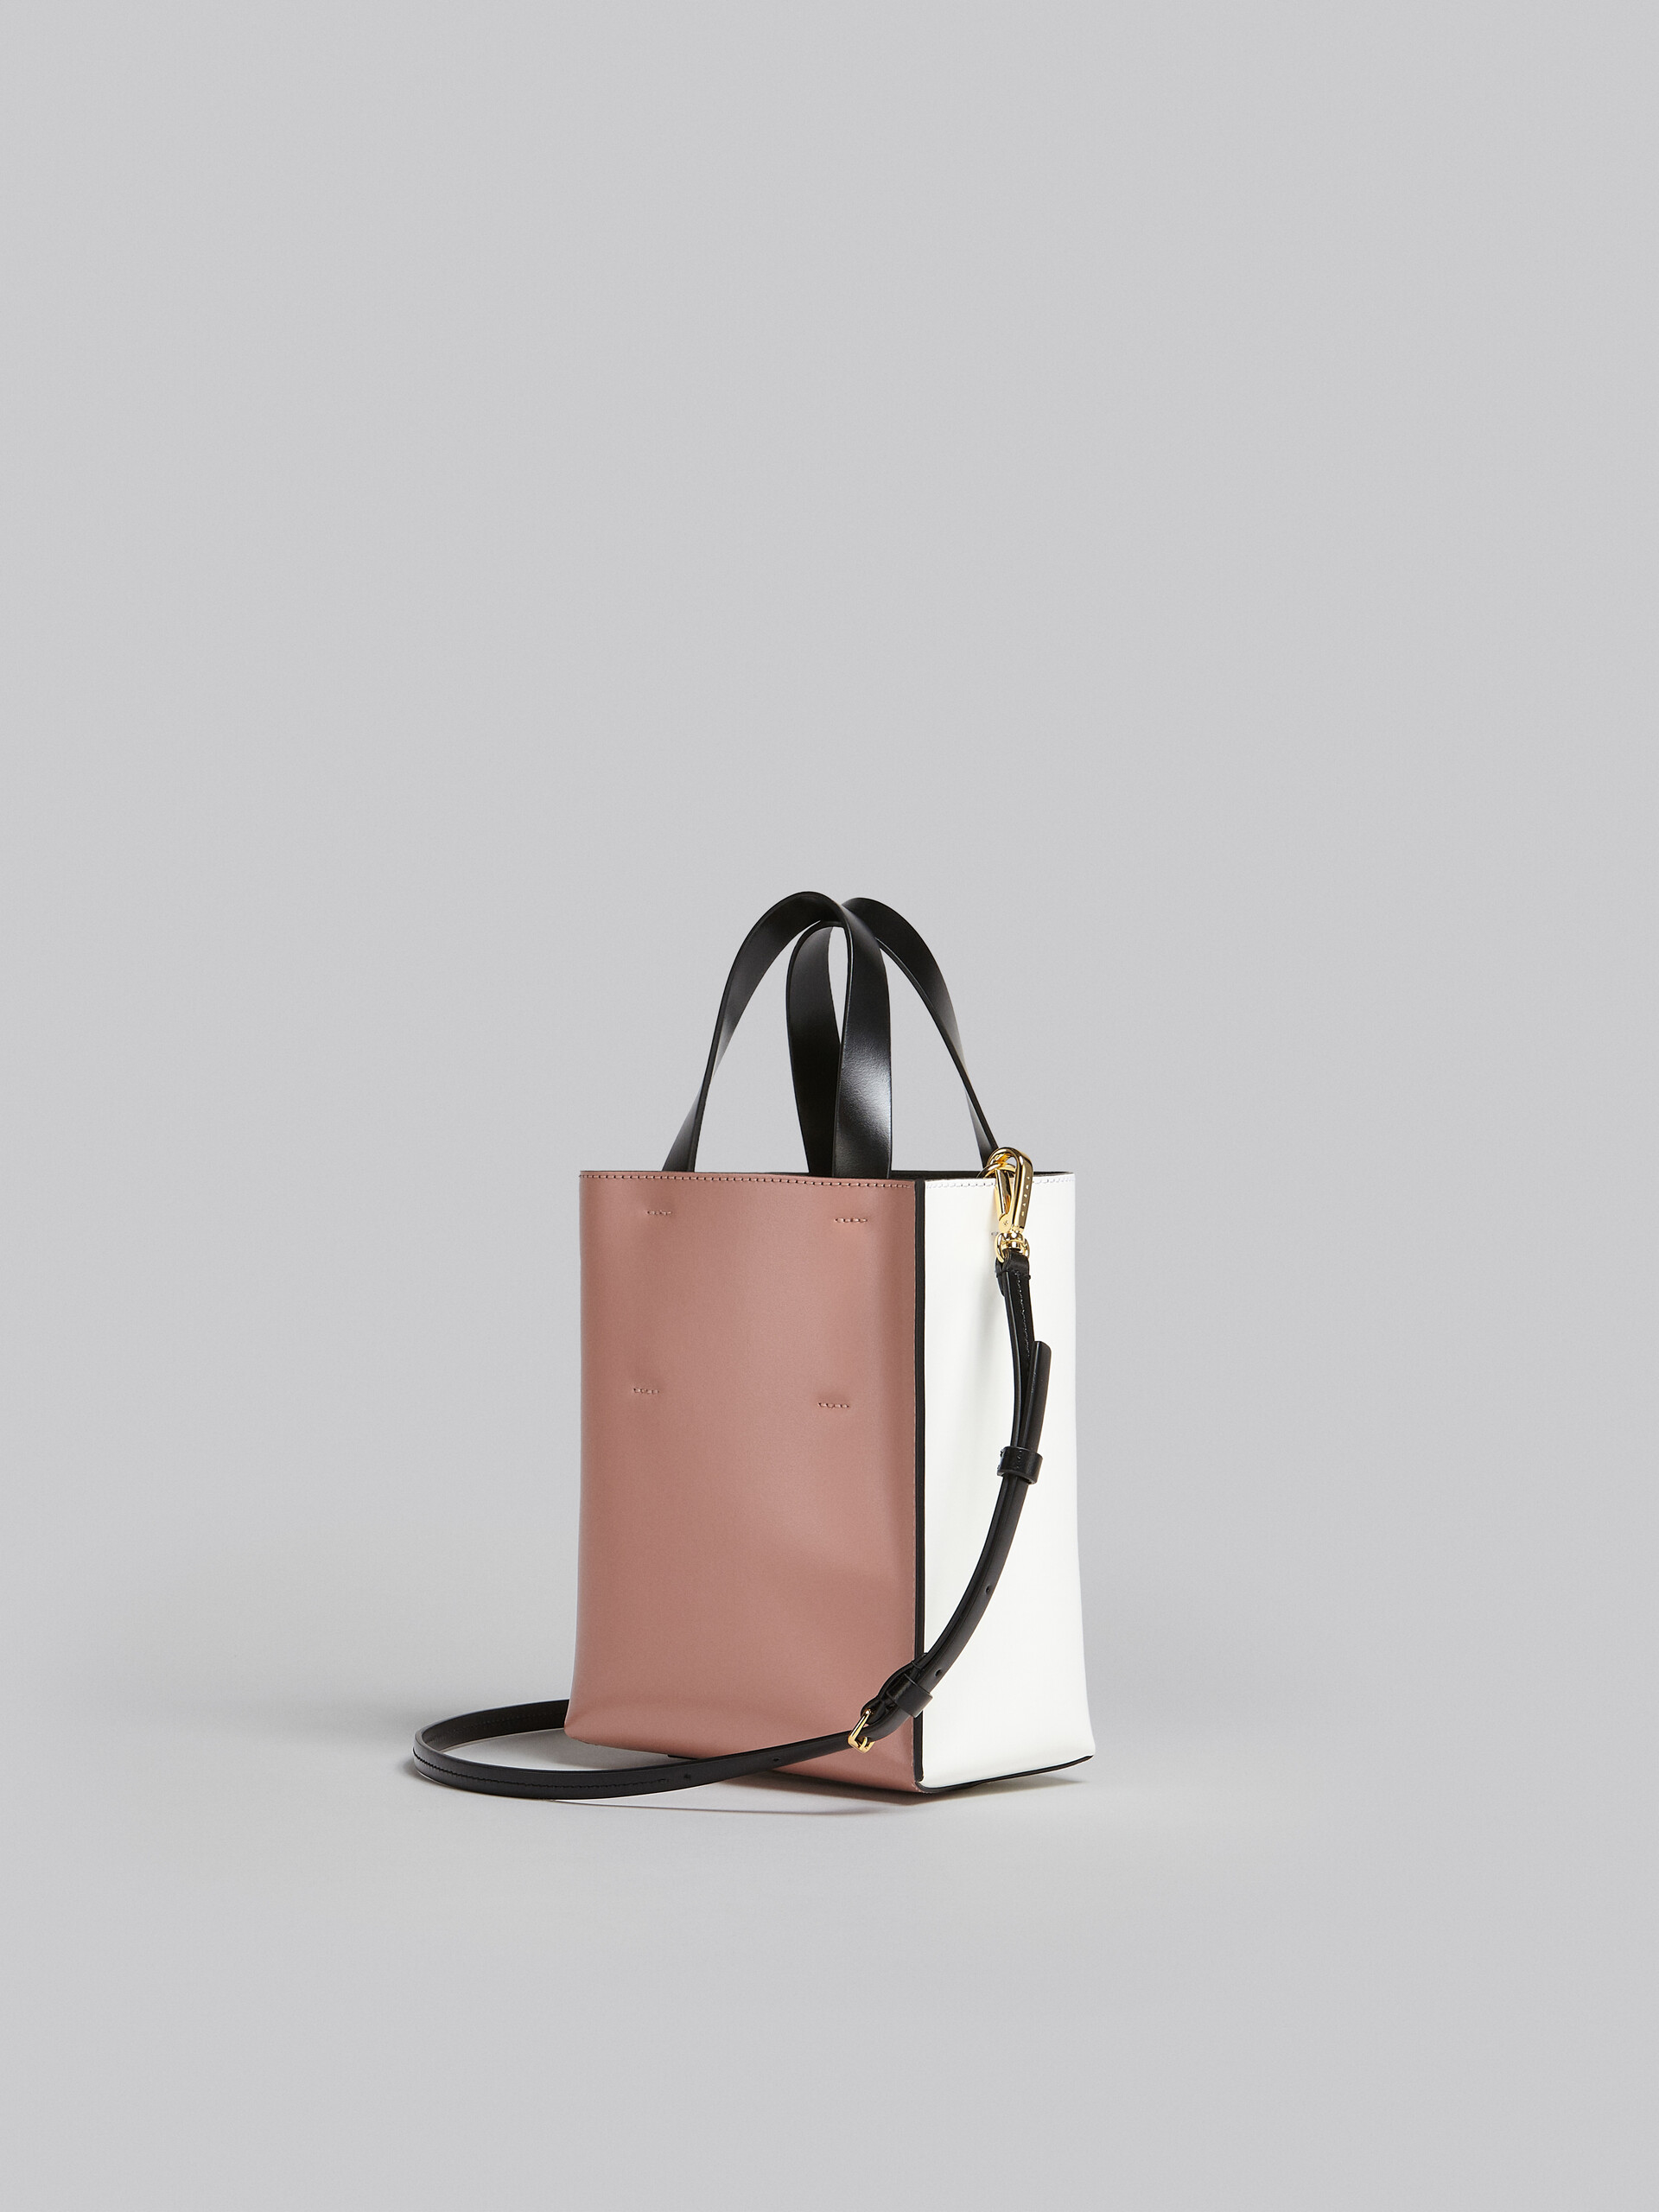 Museo Mini Bag in pink white and black leather - Shopping Bags - Image 3